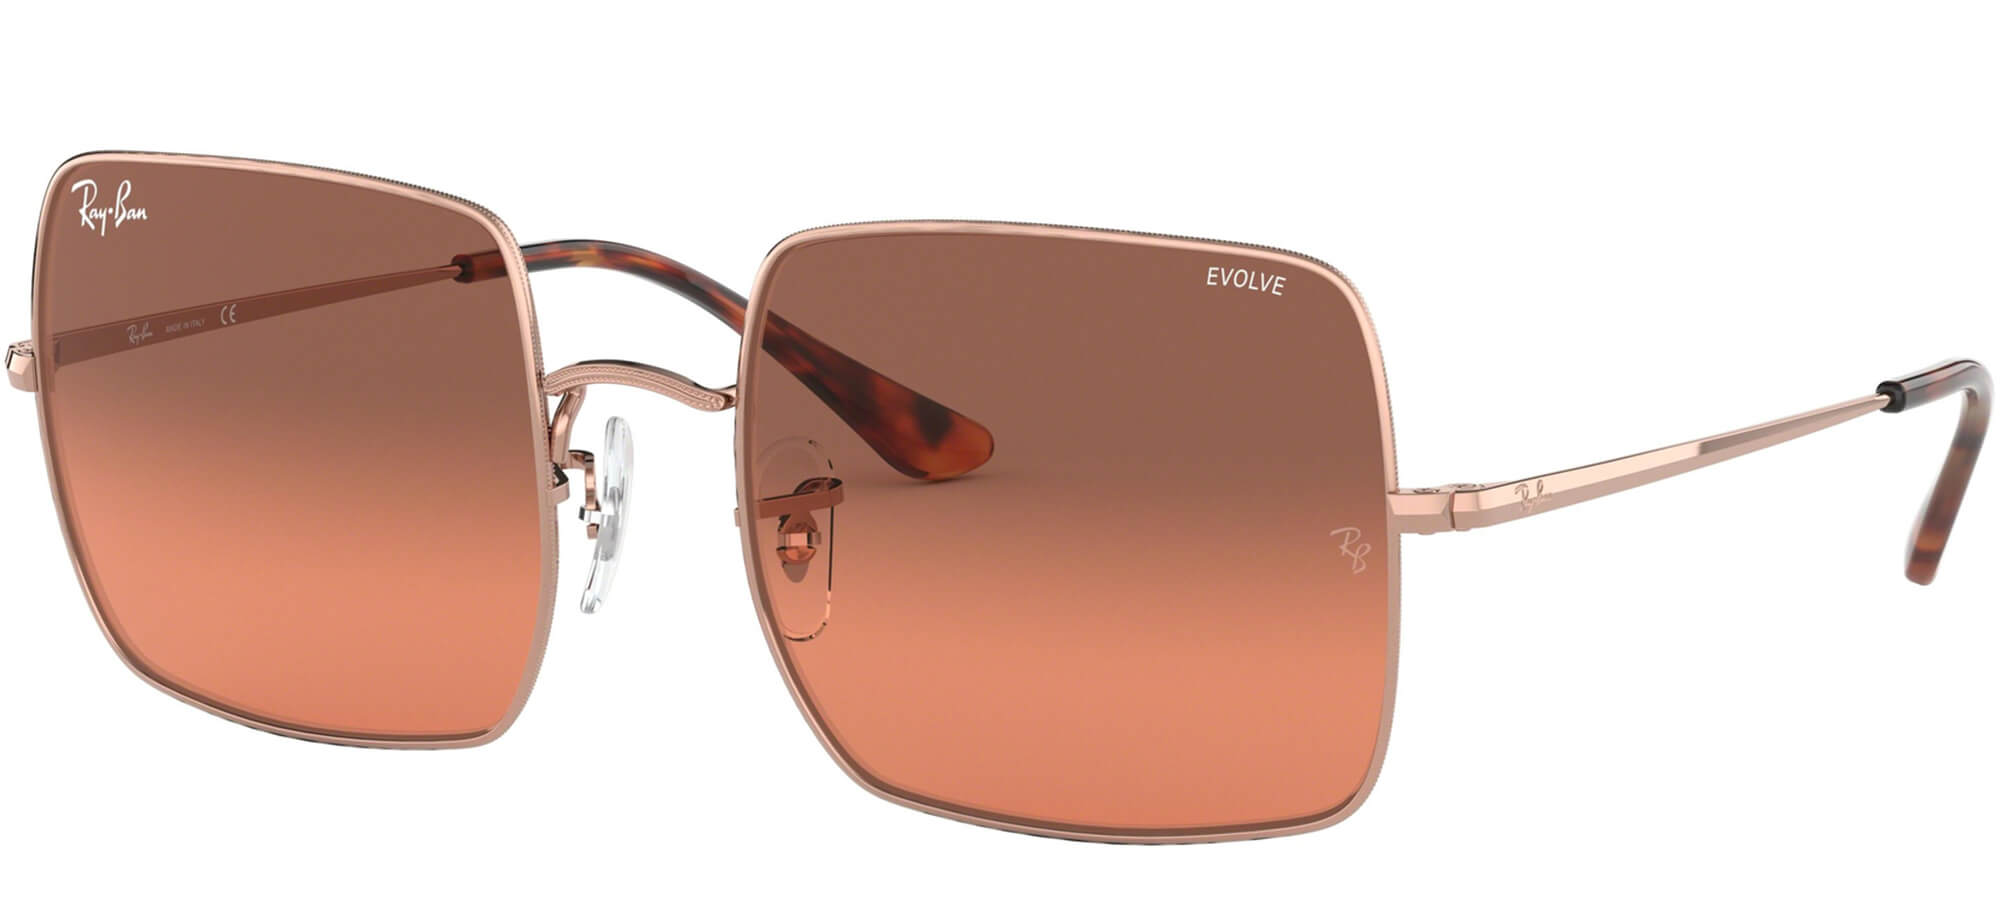 Ray-BanSQUARE RB 1971 EVOLVE LENSESRose Gold/burgundy Red Shaded (9151/AA)